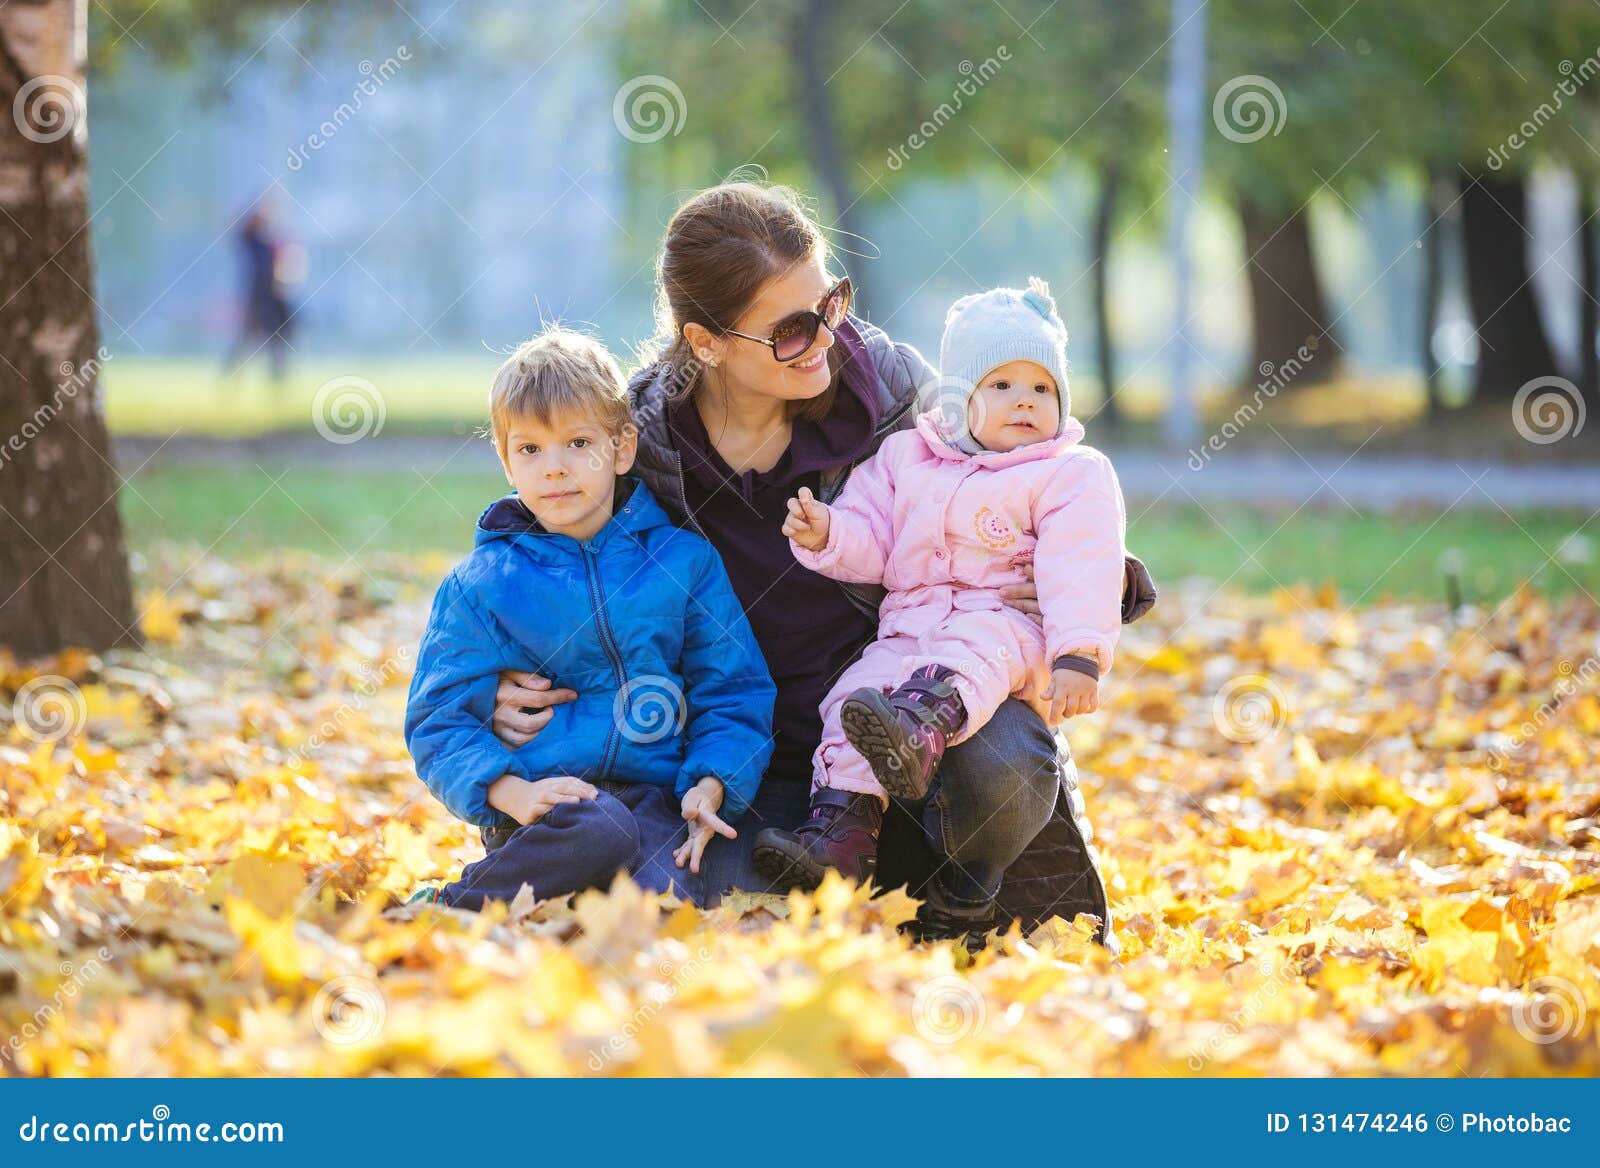 young woman with preschool son and baby daugther enjoying beautiful day